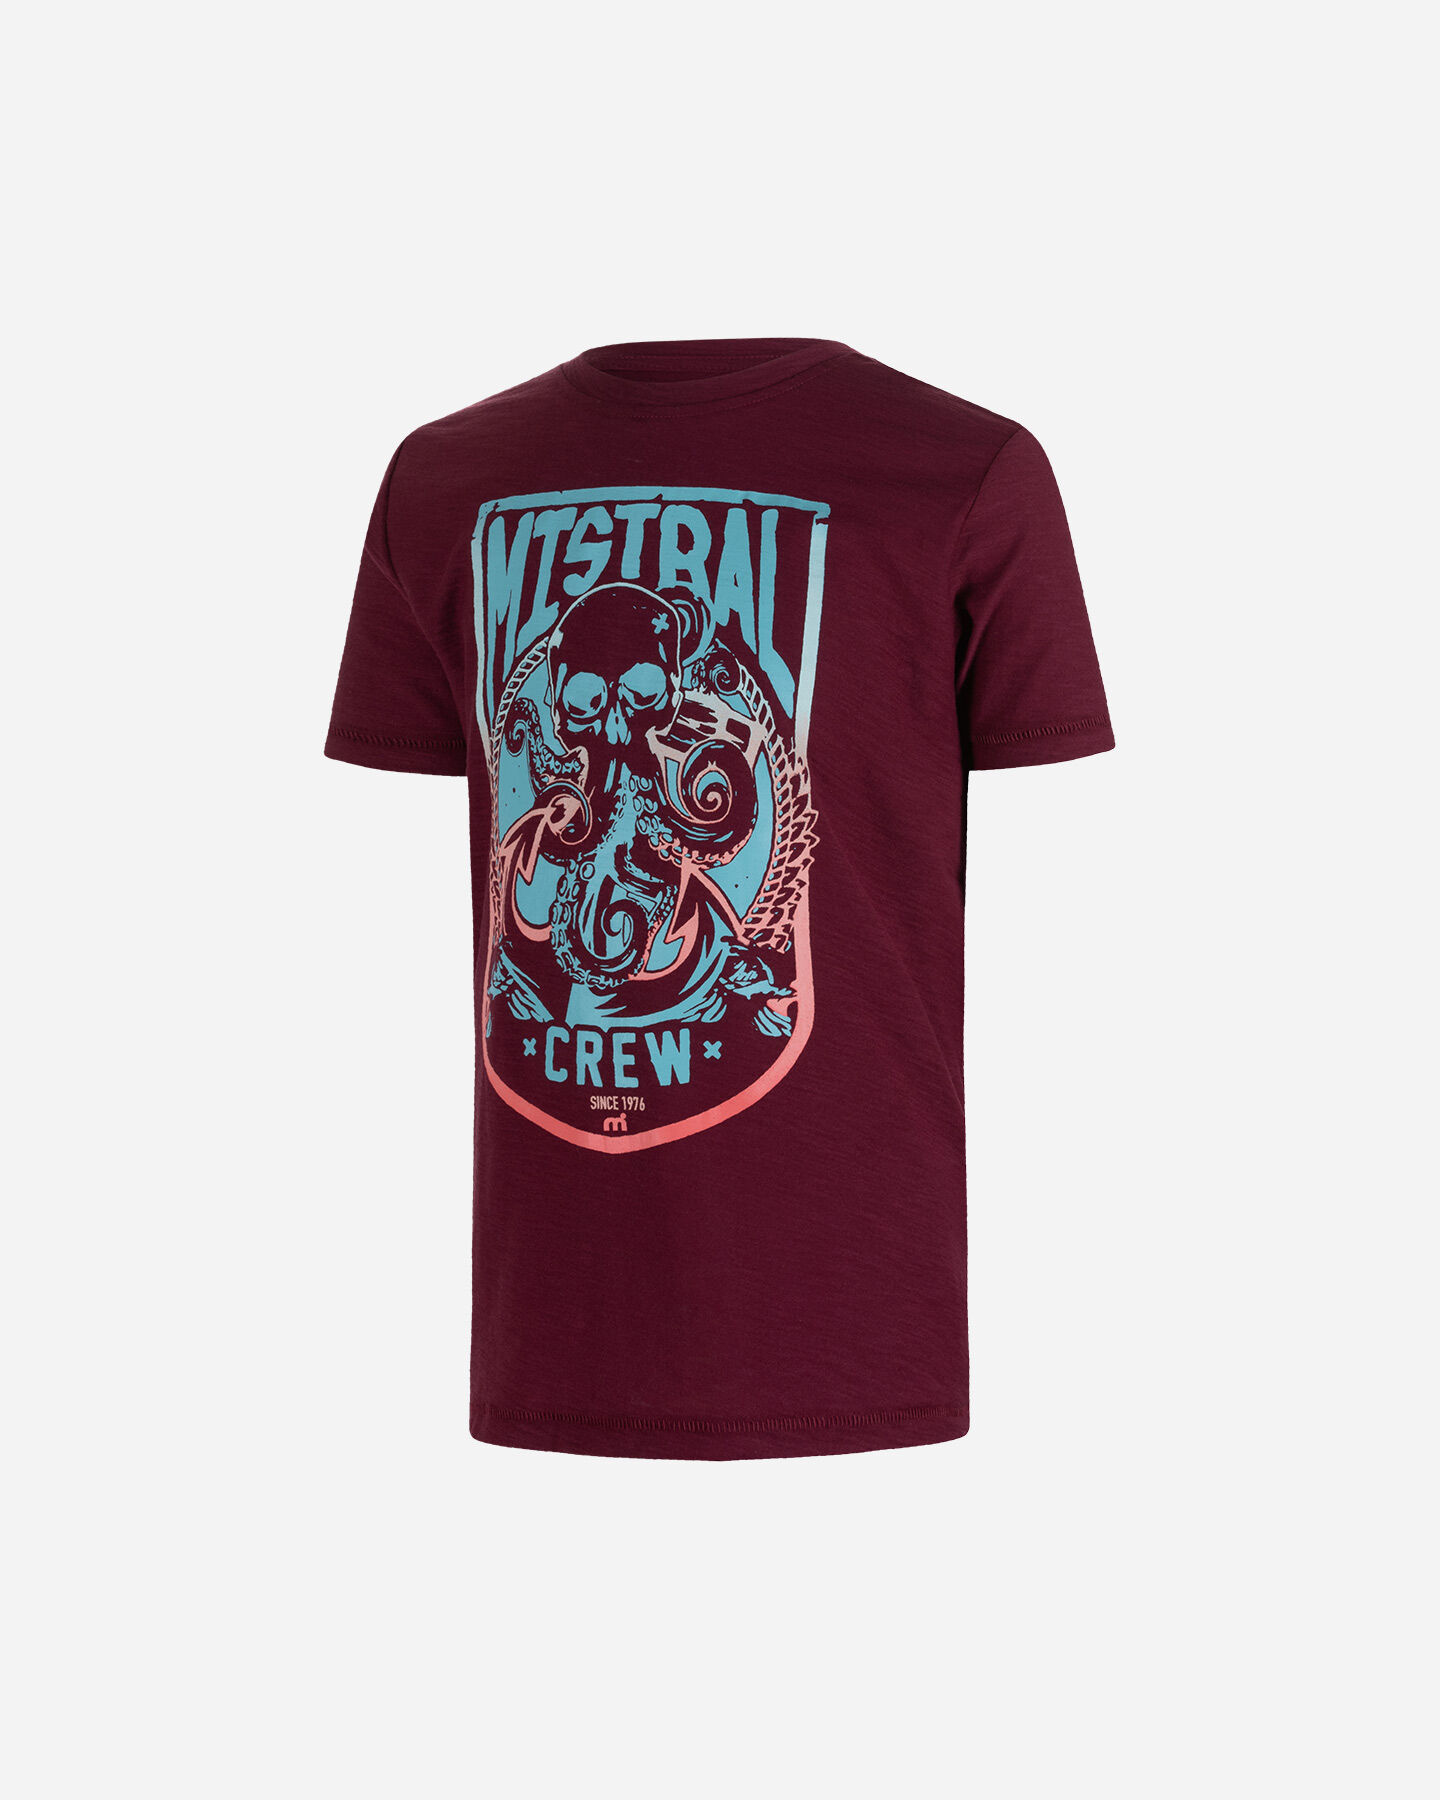  T-Shirt MISTRAL SKULL JR S4118414|299|6A scatto 0